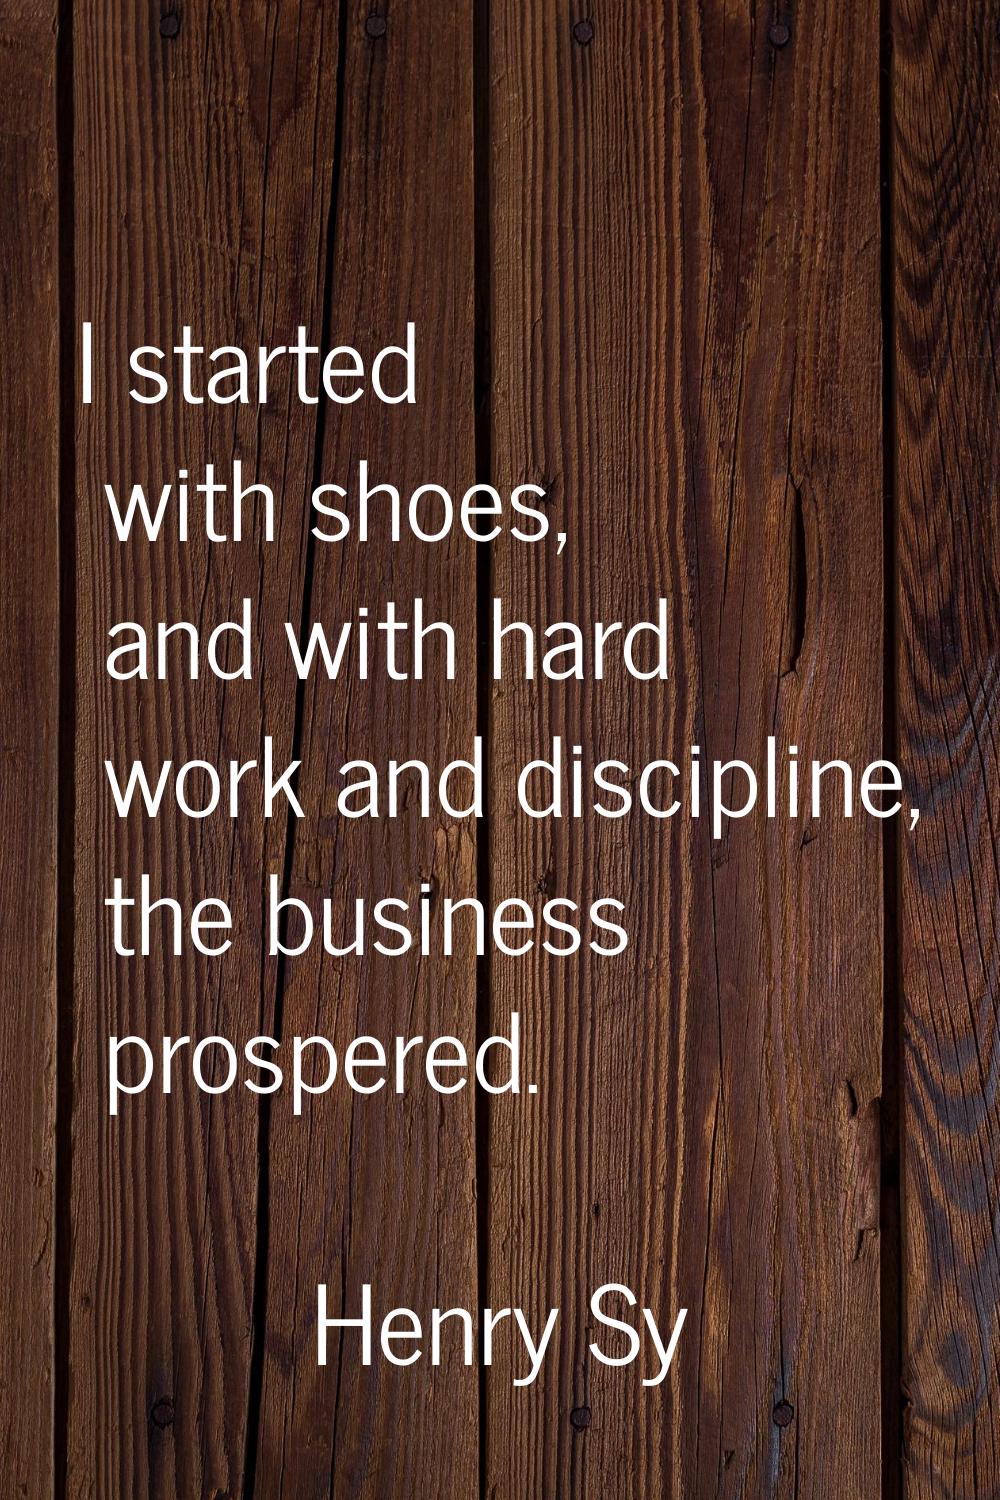 I started with shoes, and with hard work and discipline, the business prospered.